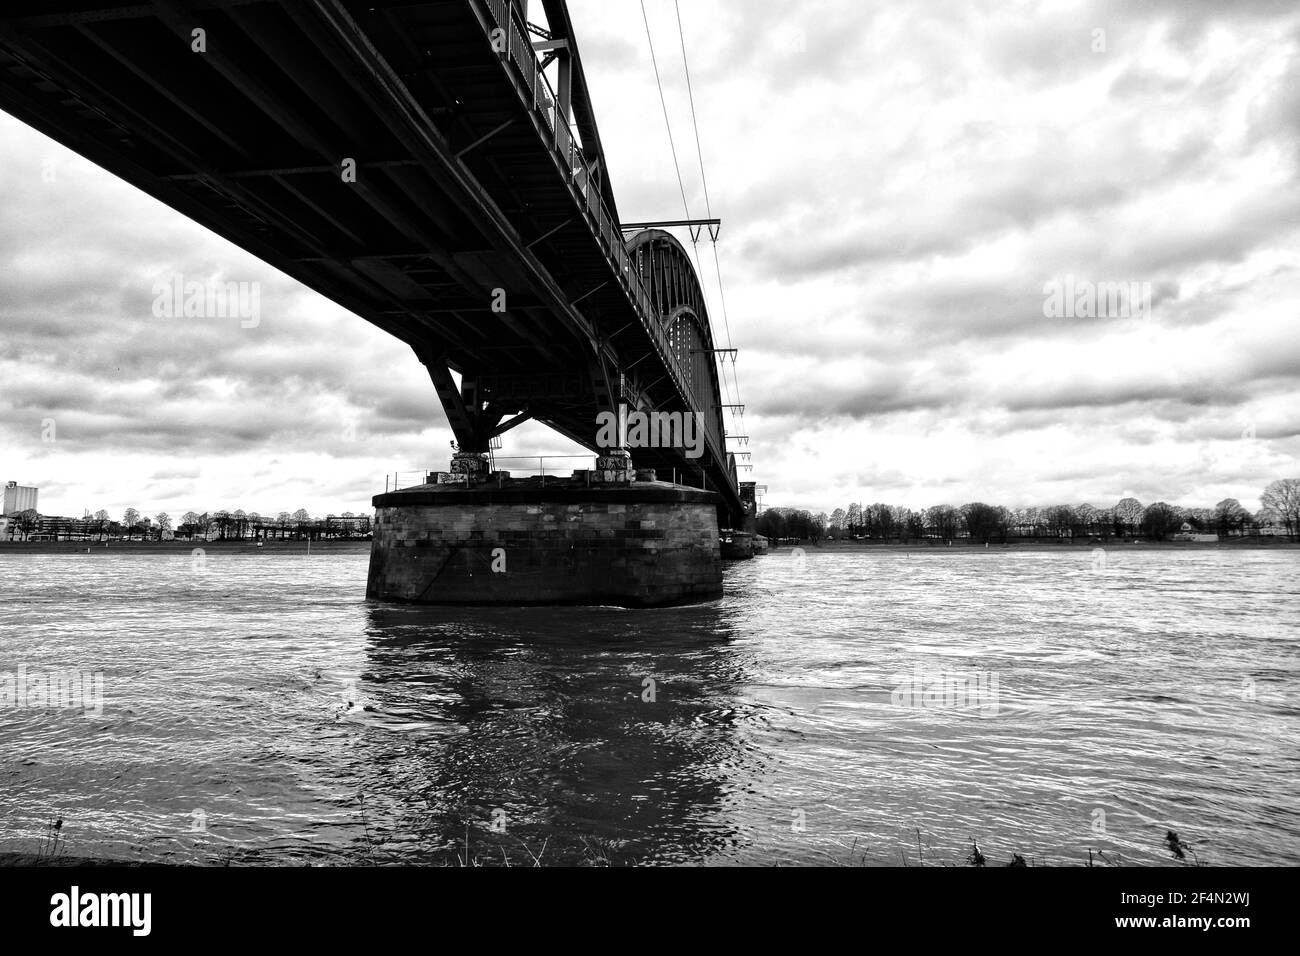 The Rhein River in Cologne, Germany Stock Photo